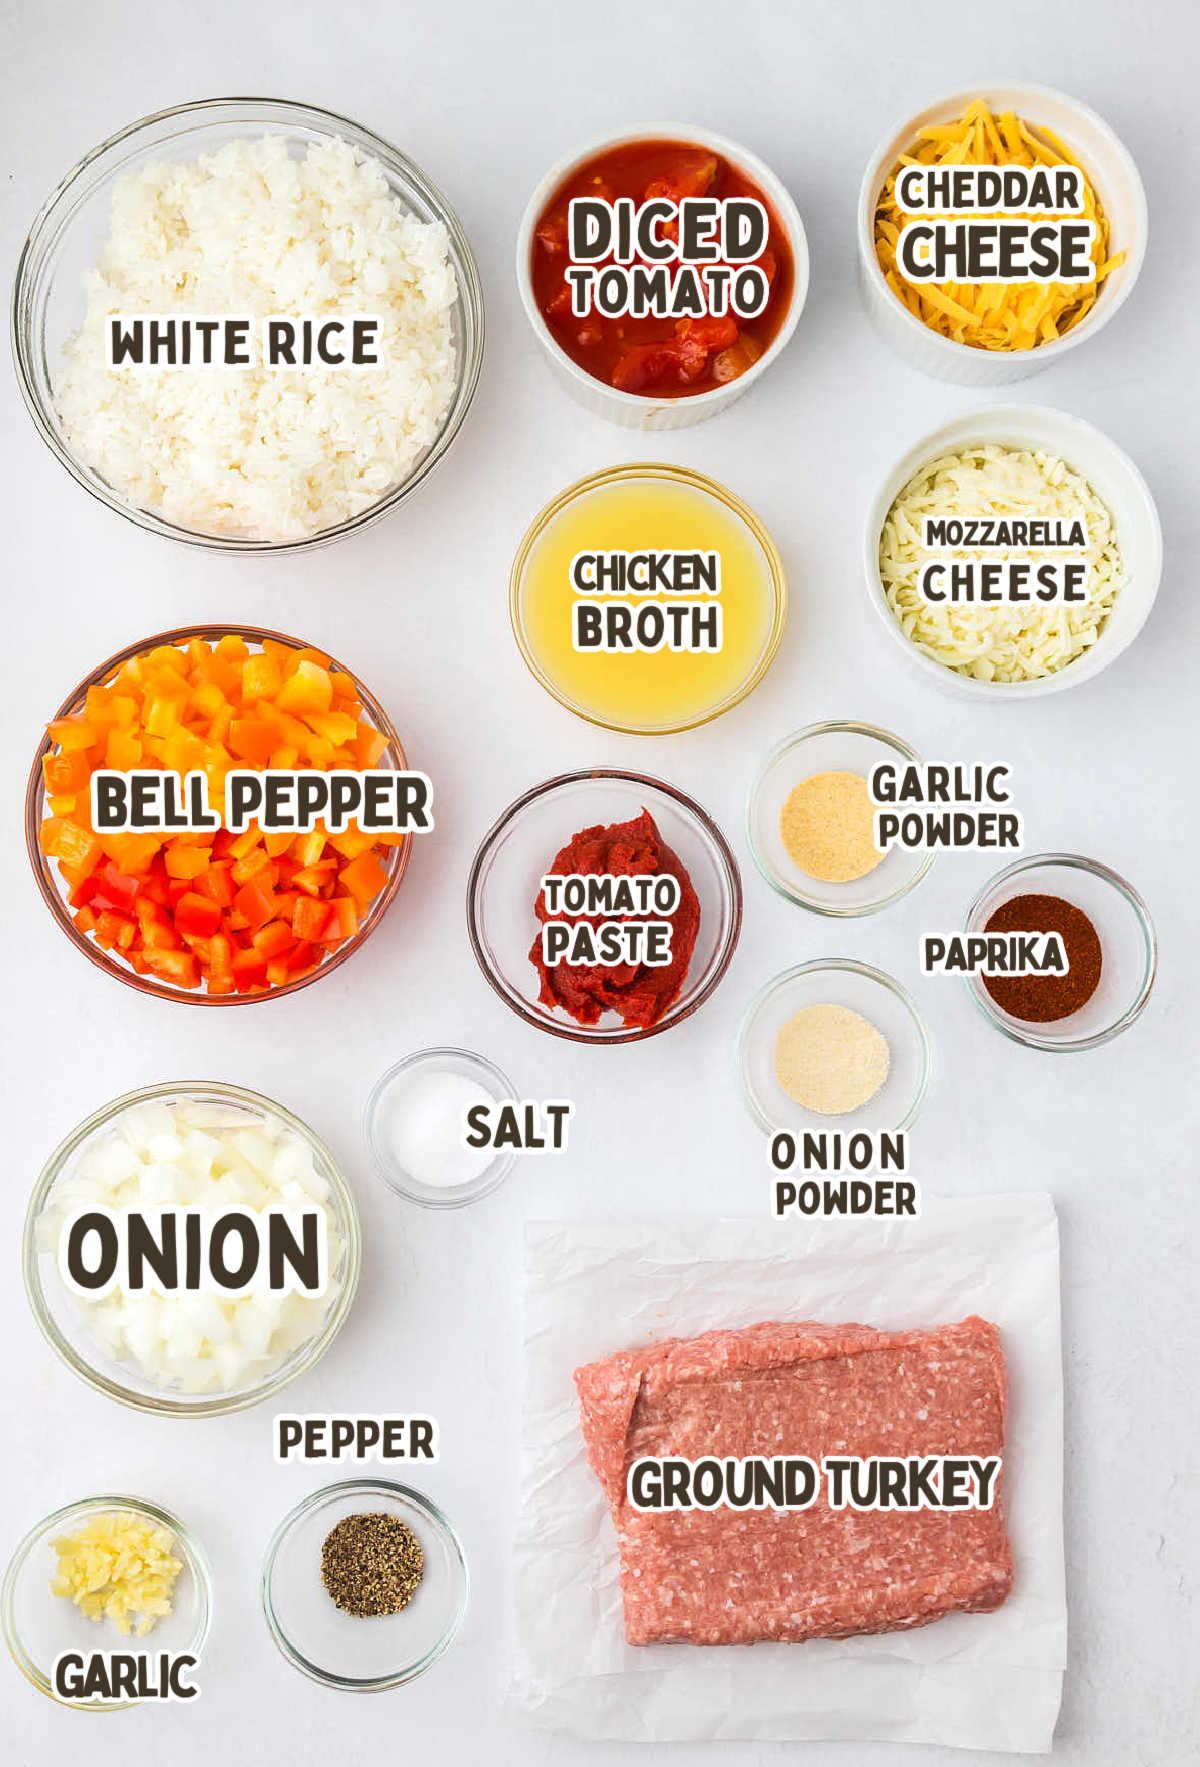 The ingredients for Stuffed Pepper Casserole on a white background.